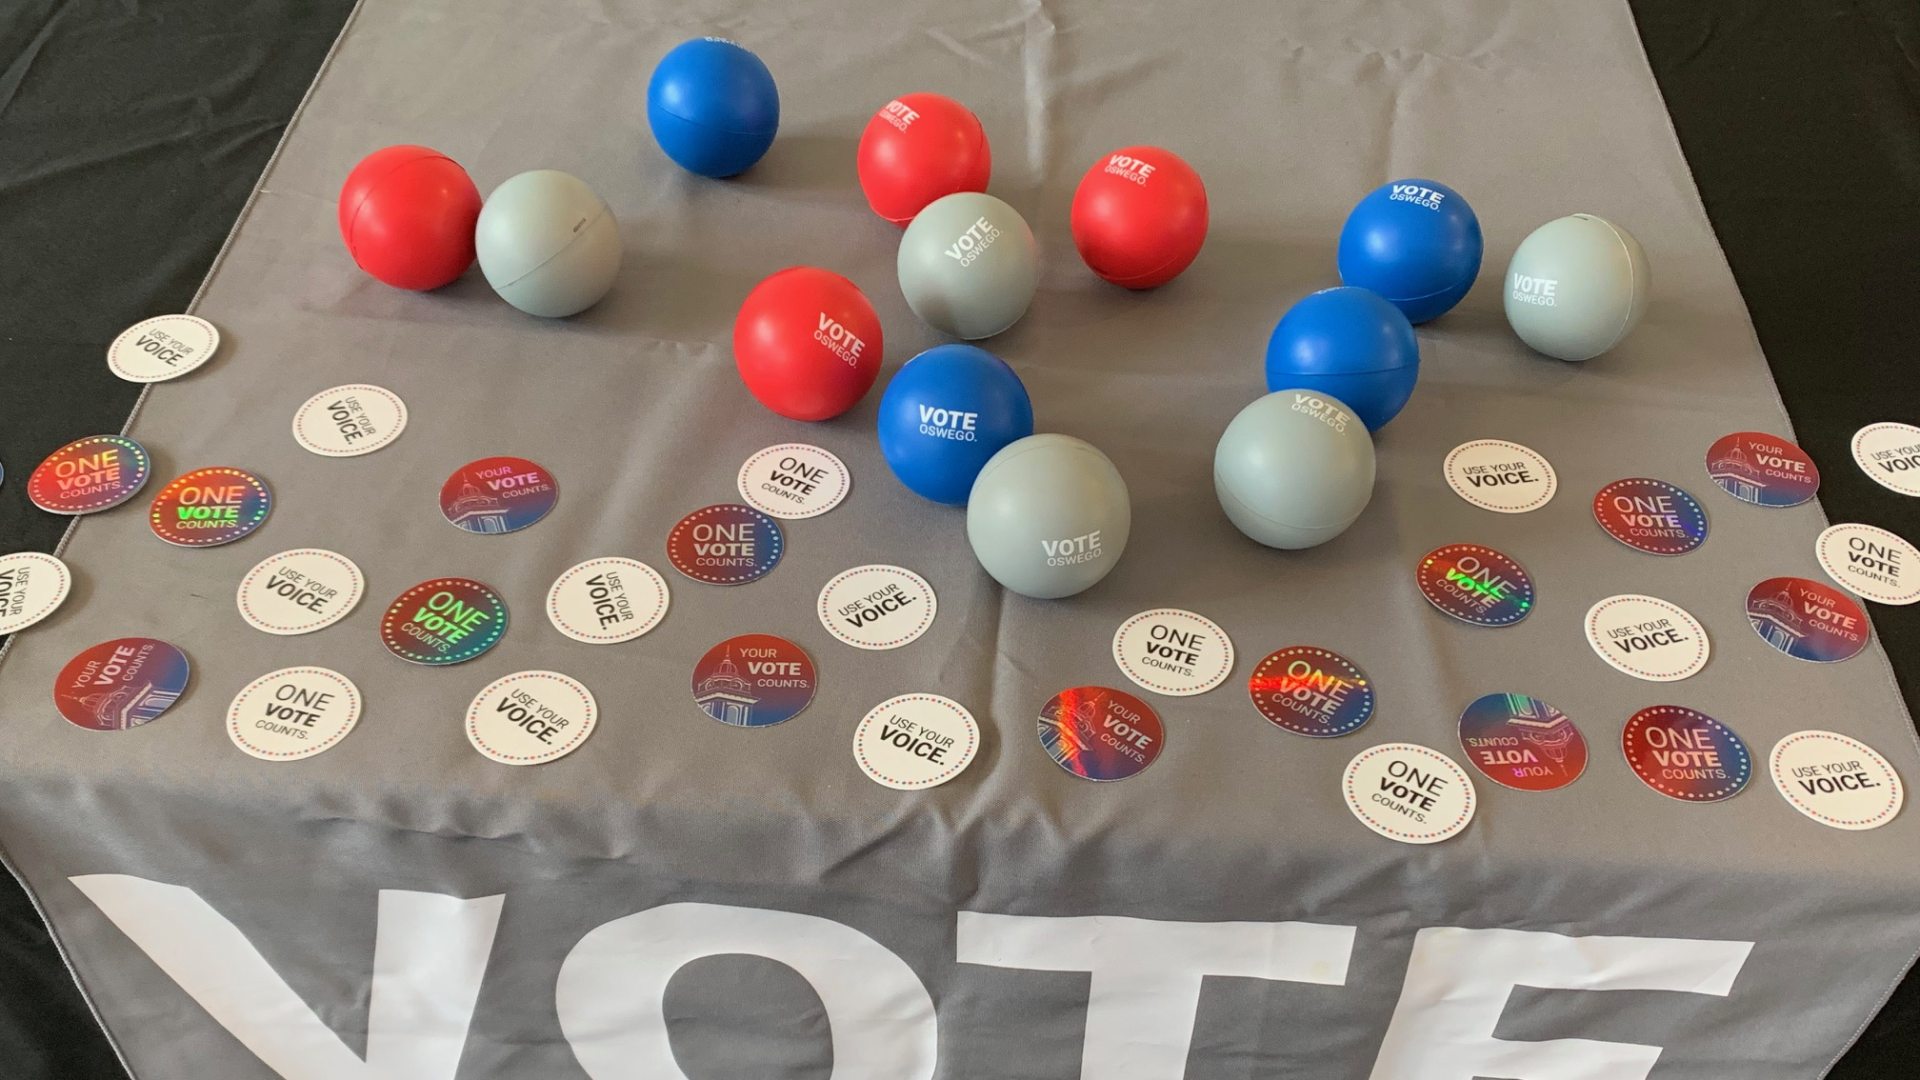 Vote Oswego - Image of table at event with stickers and stress balls